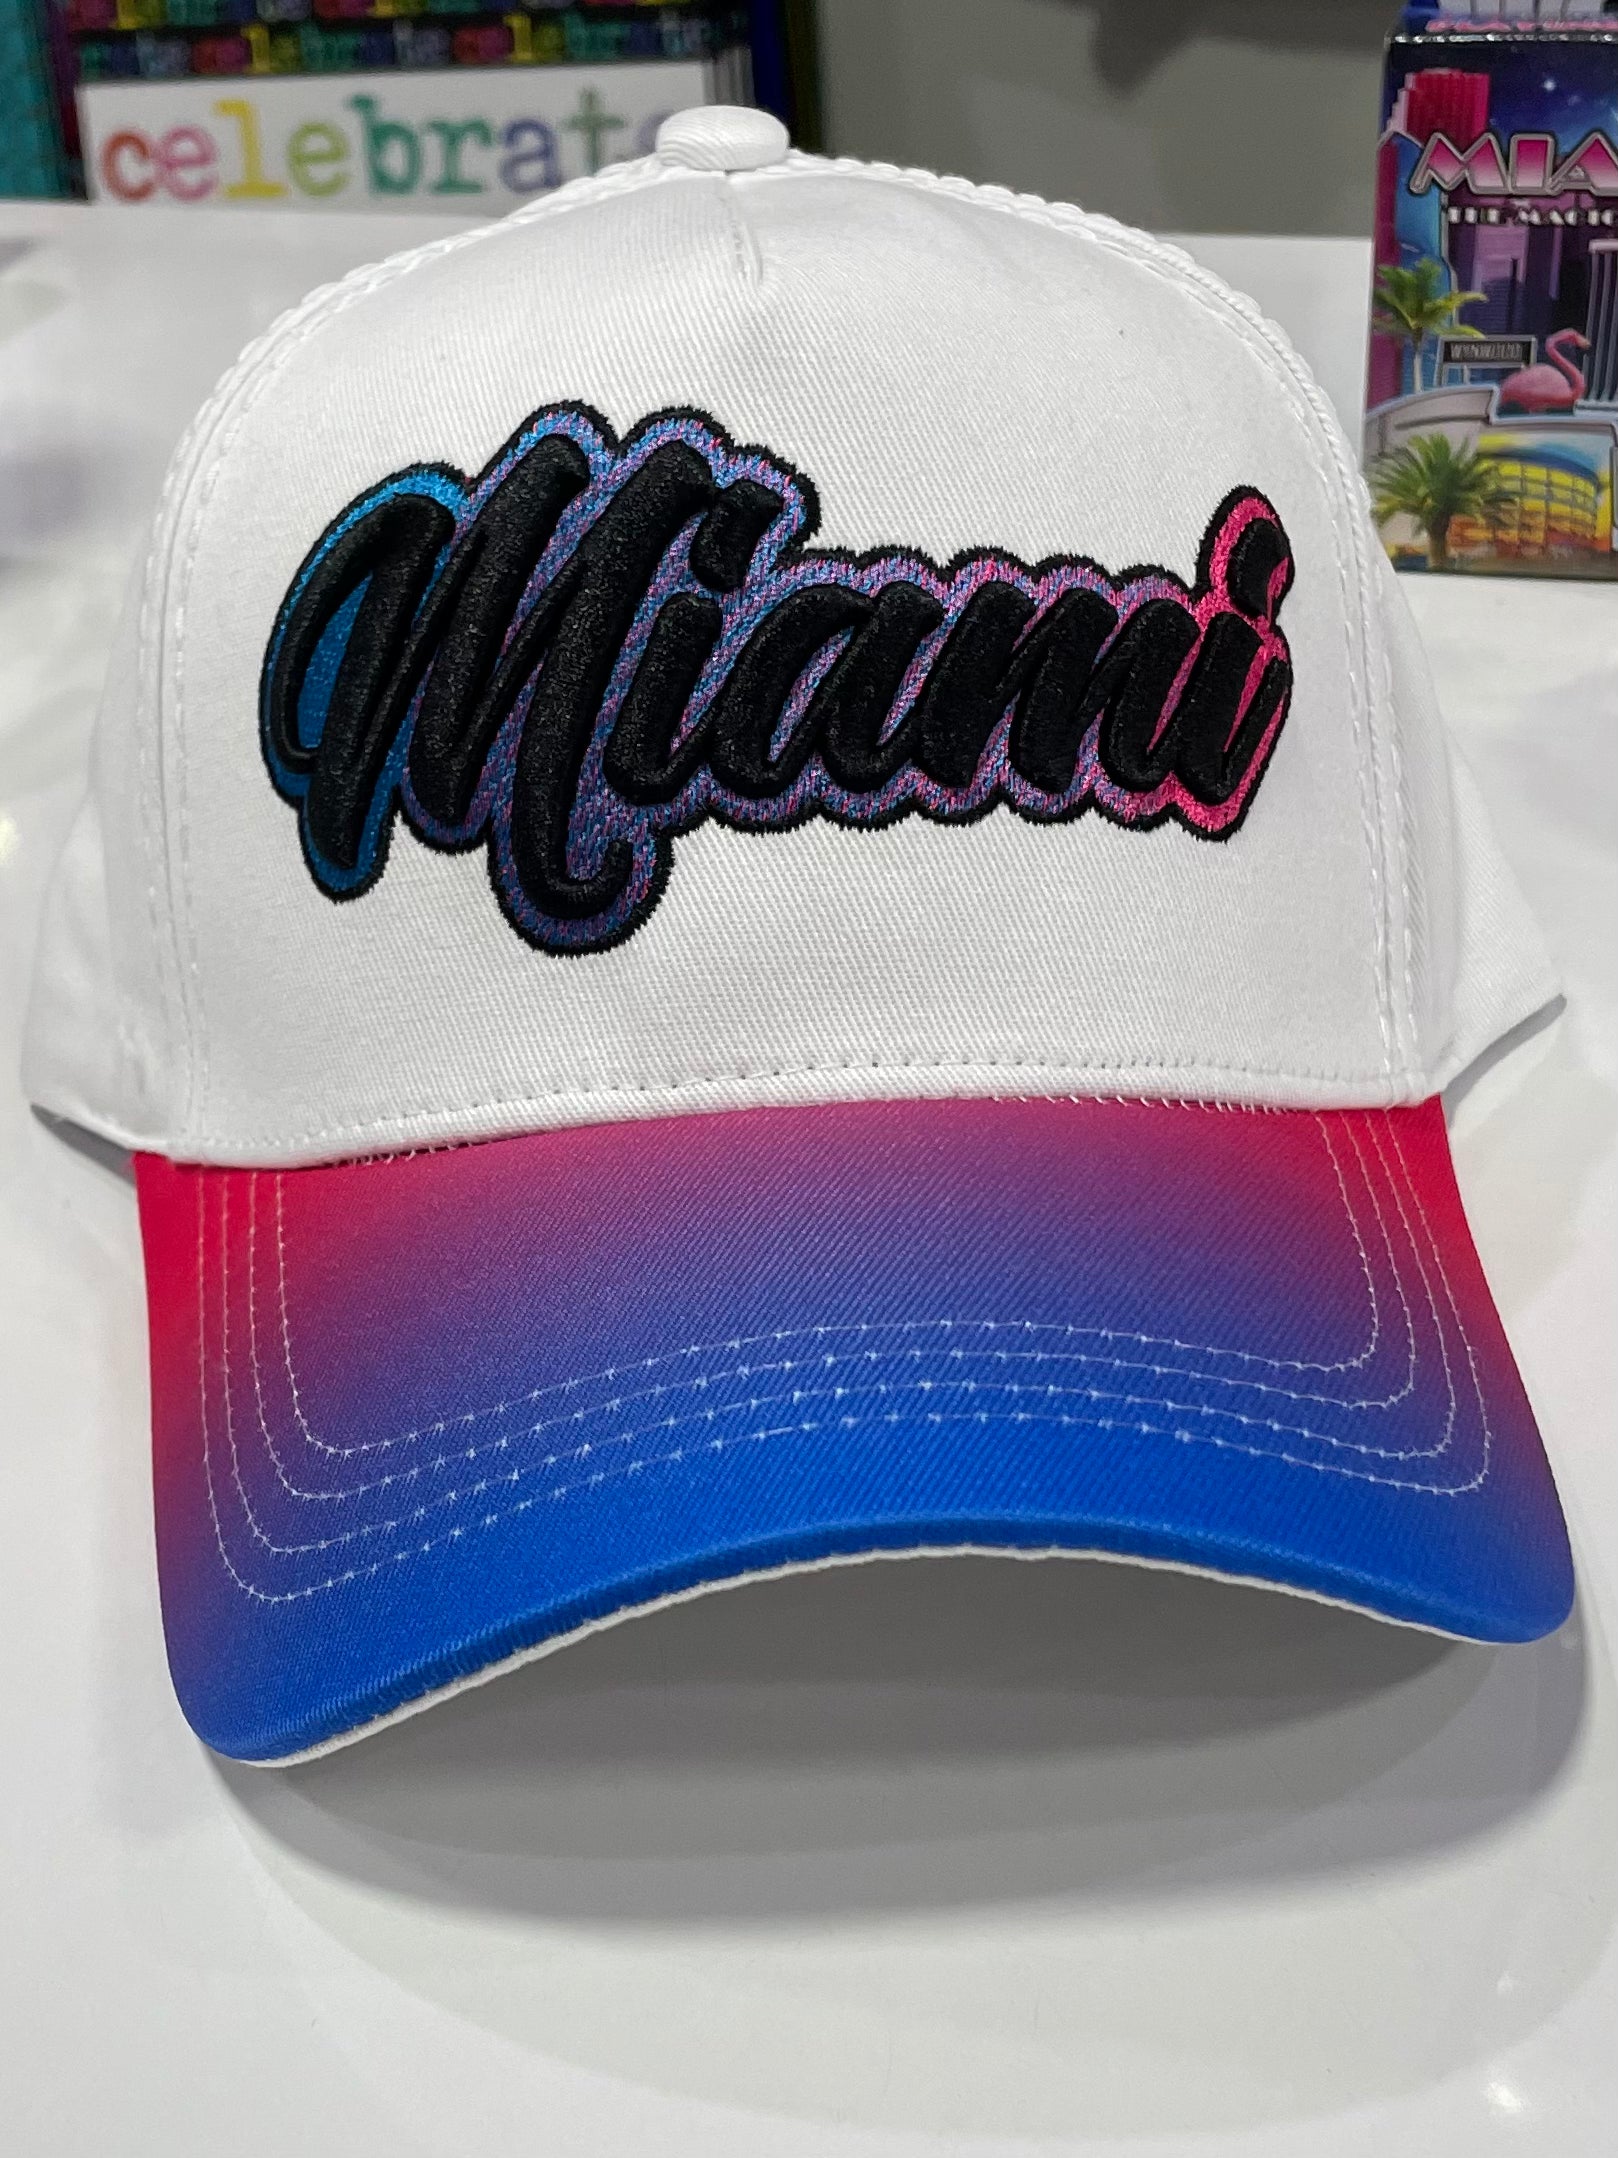 Miami Hat/Cap Adult Size - One Size Fits Most, Mom Gift Baseball Hat –